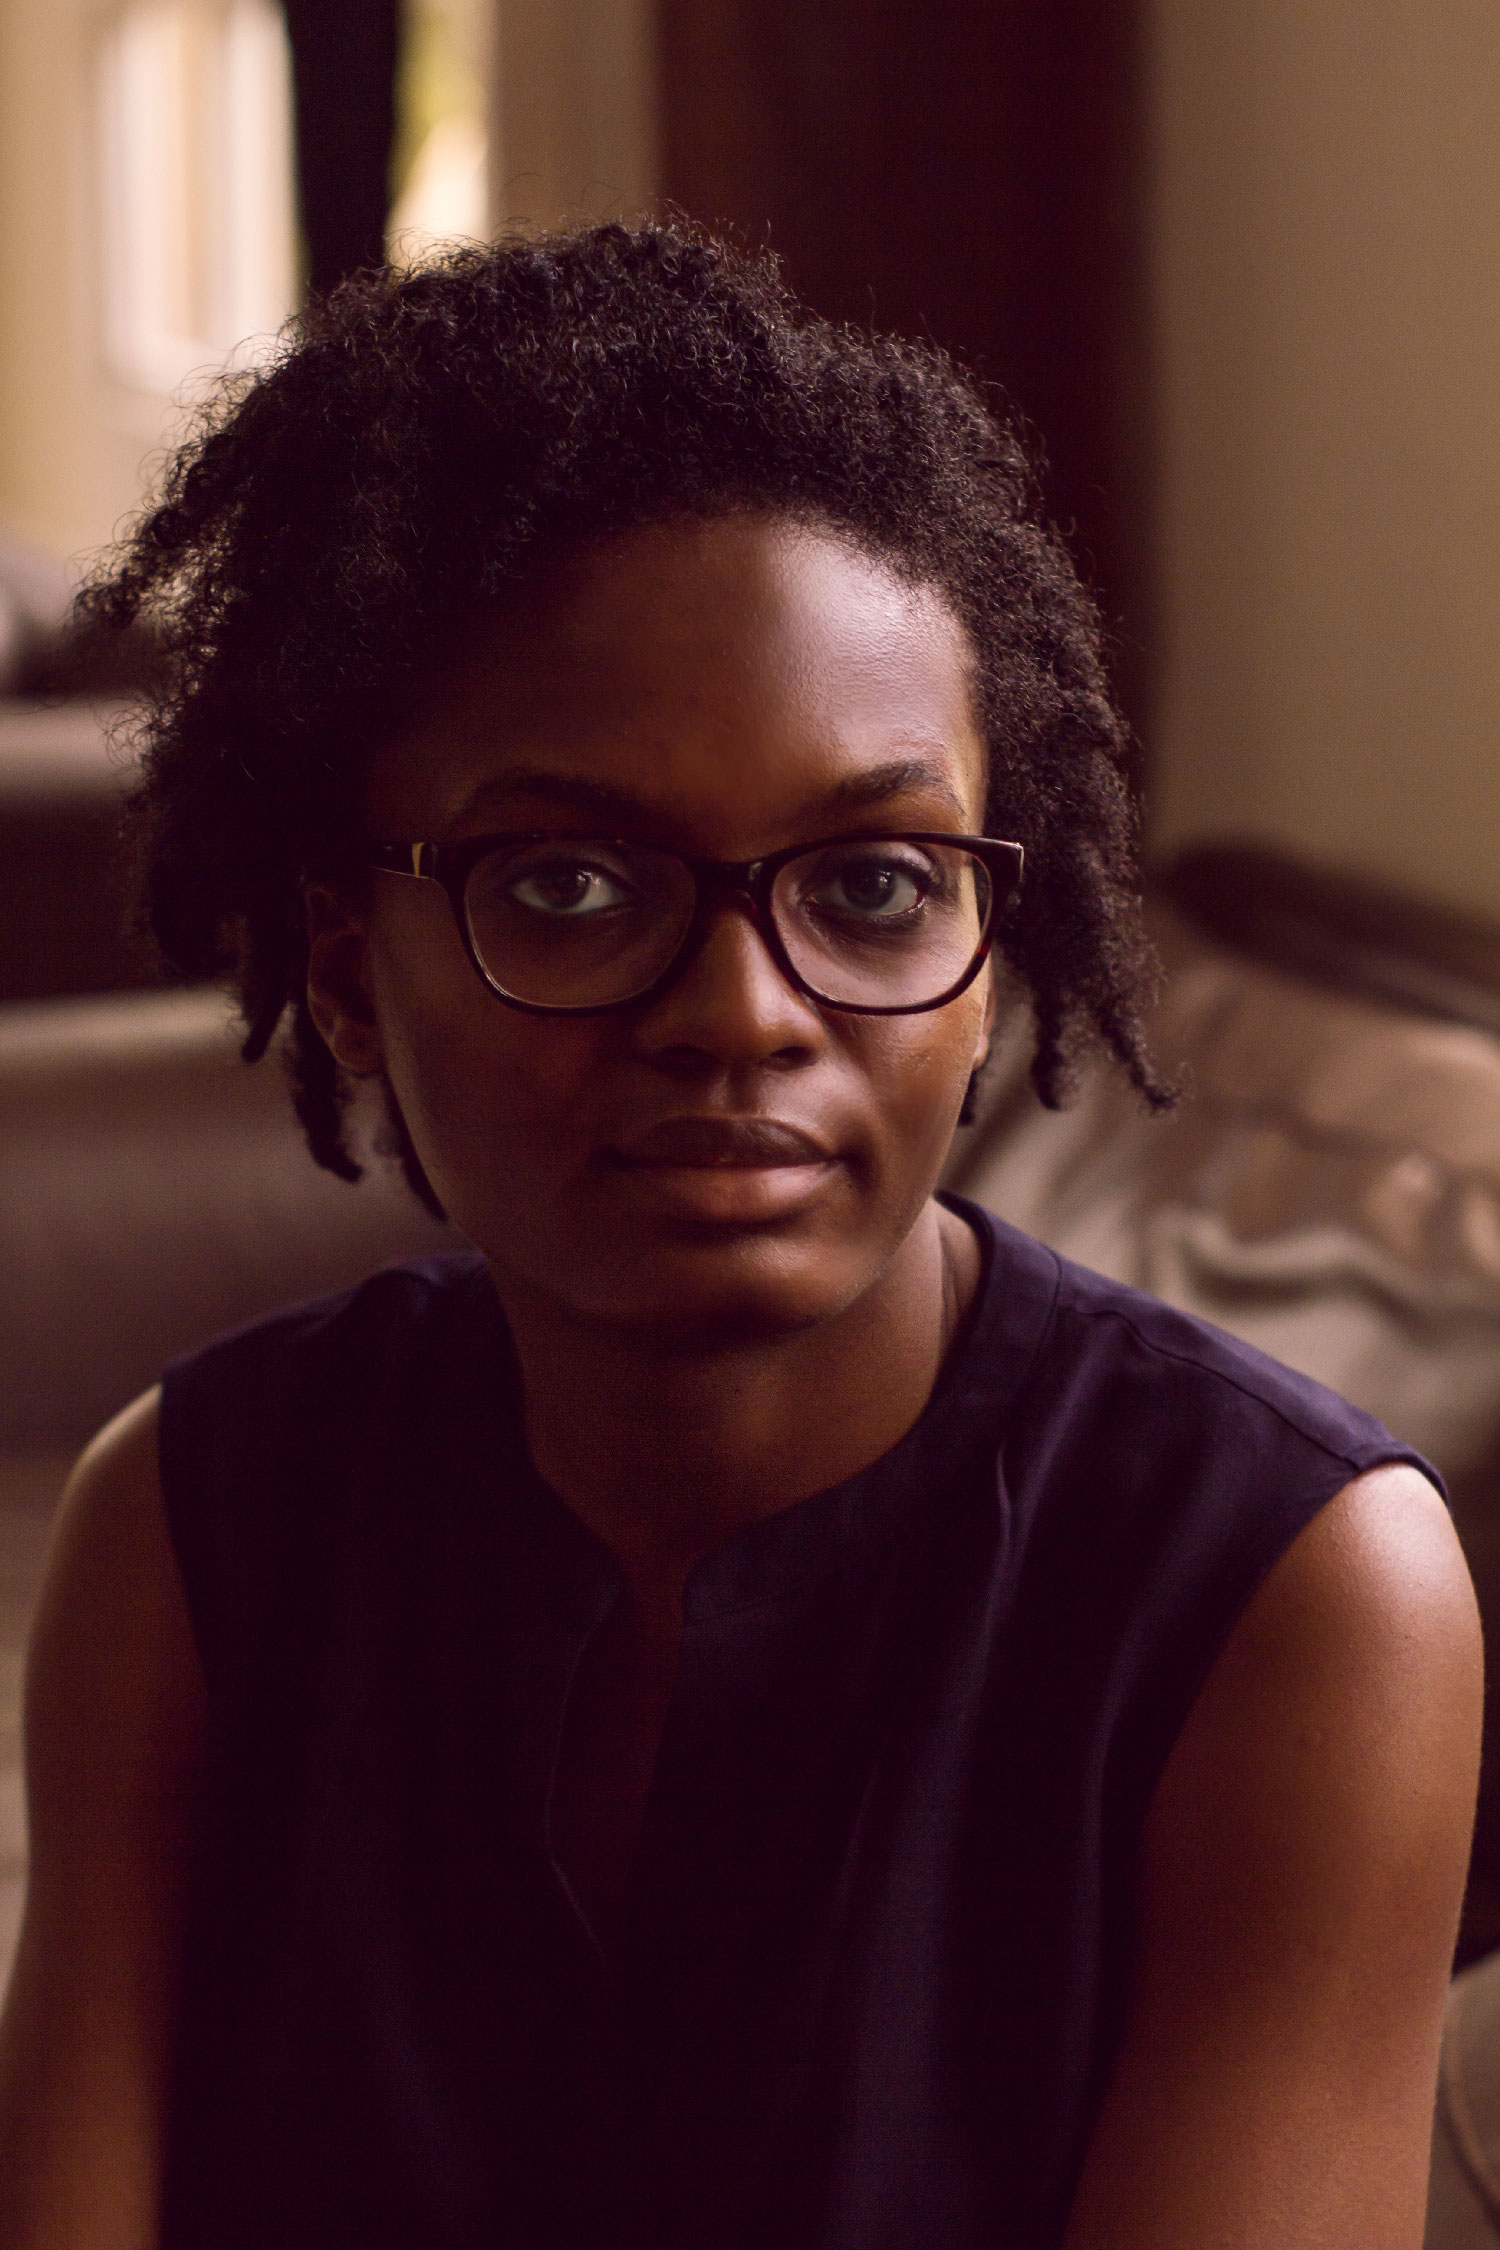 A black-skinned person with curly black hair, wearing thick black glasses and a dark sleevless top, smiles at the camera.She is pictures in an indoor space with furniture in the backgorund.